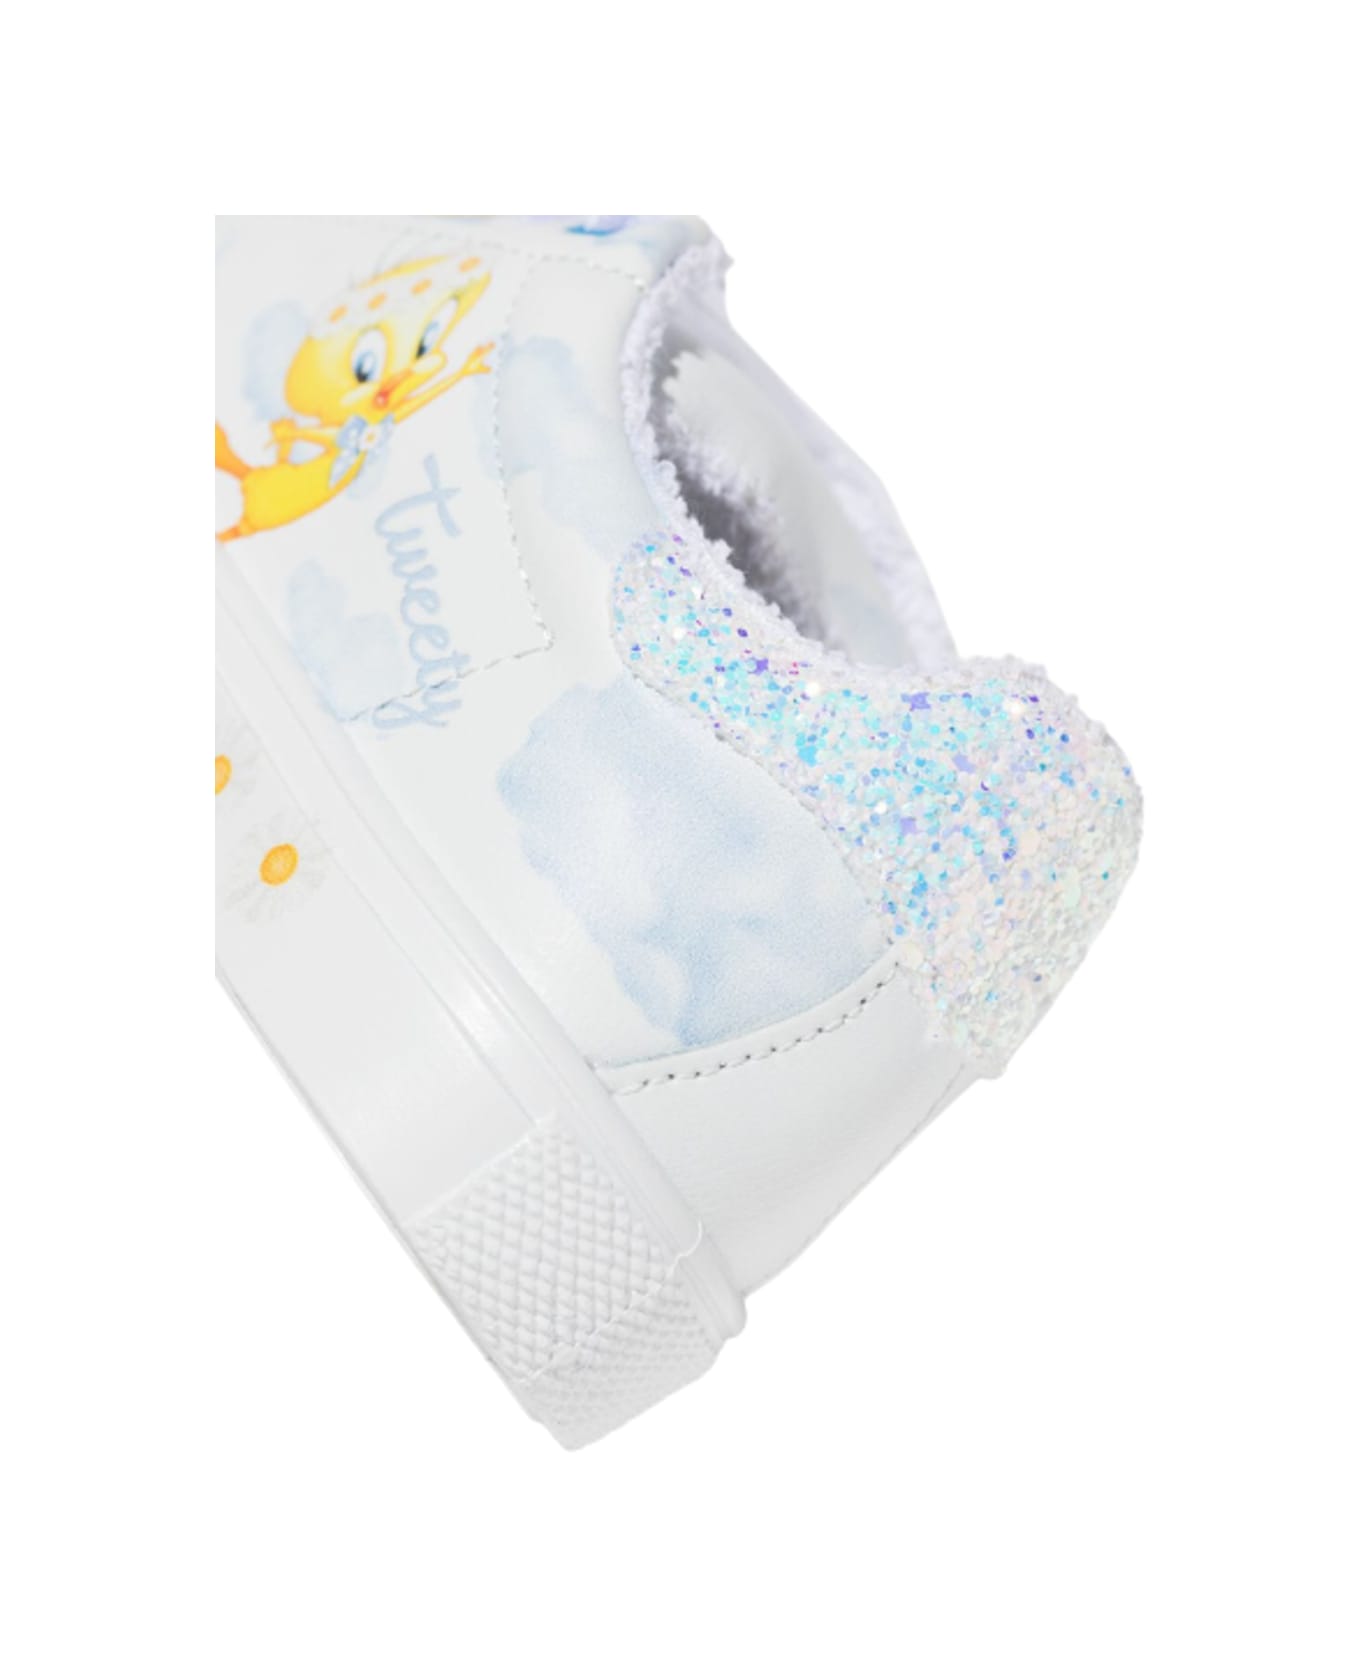 Monnalisa White Leather Sneakers With Tweety Clouds Print - White